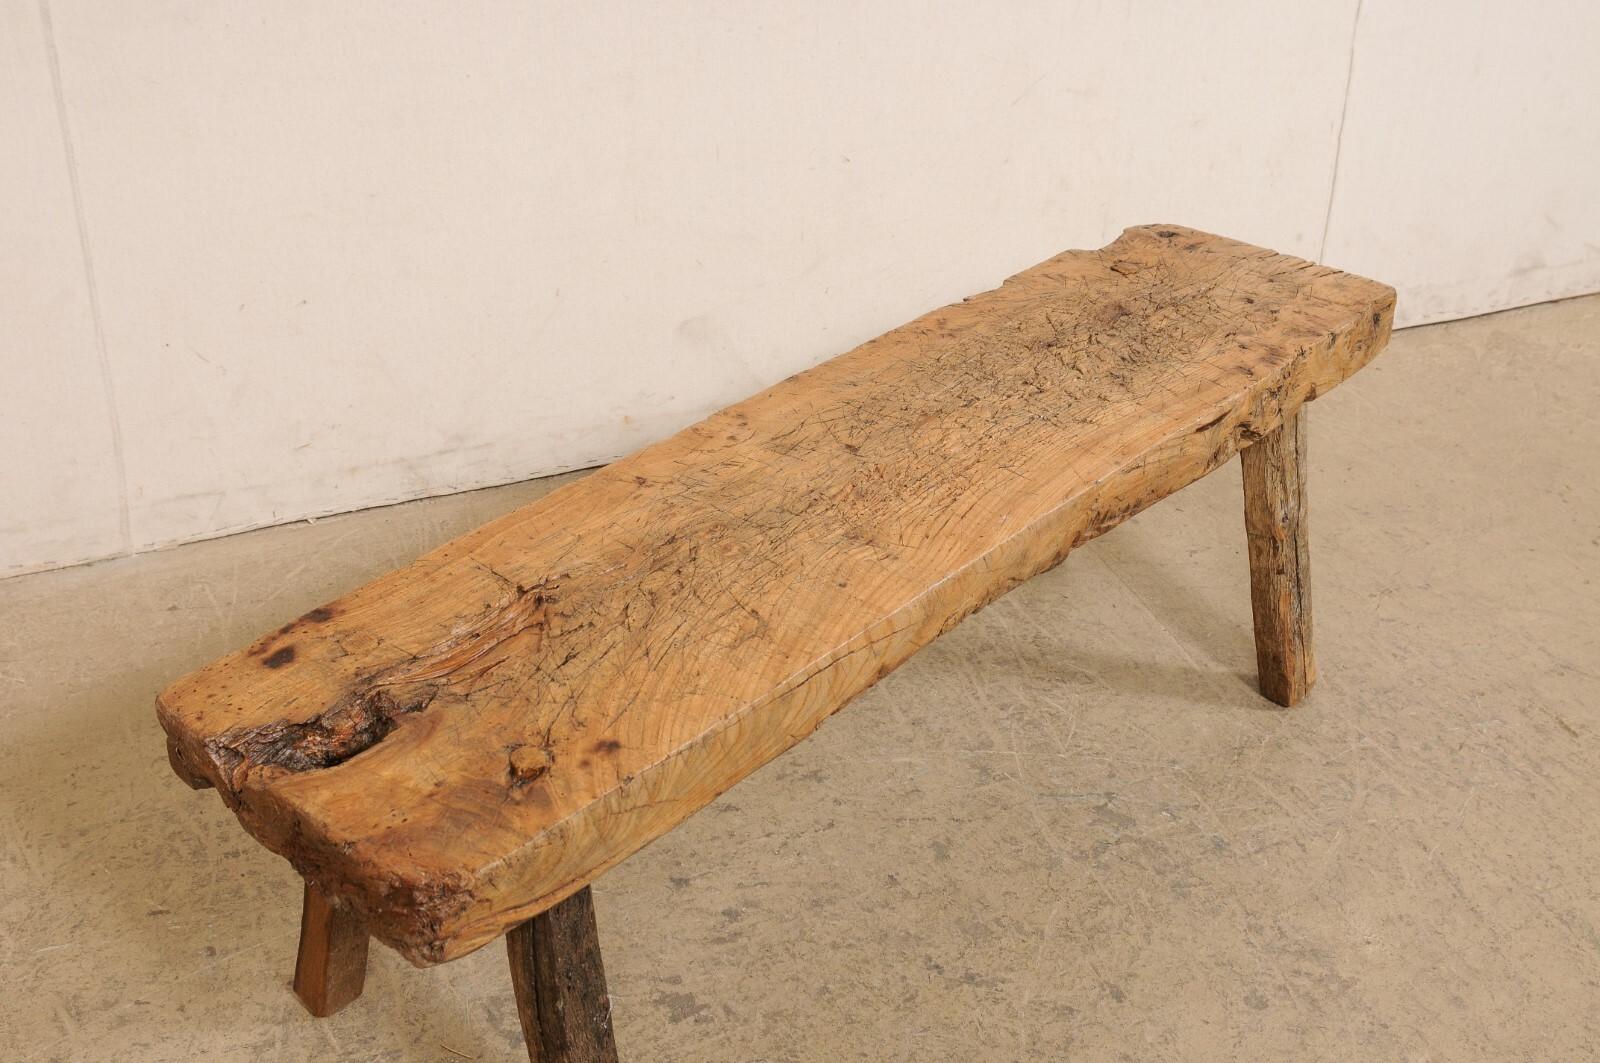 A Spanish rustic wooden bench. This vintage bench from Spain, just over 4.5 feet in length, has been constructed of a single and thickly cut slab board at top/seat, rectangular in shape, and supported by four squared legs that cant outwardly. The